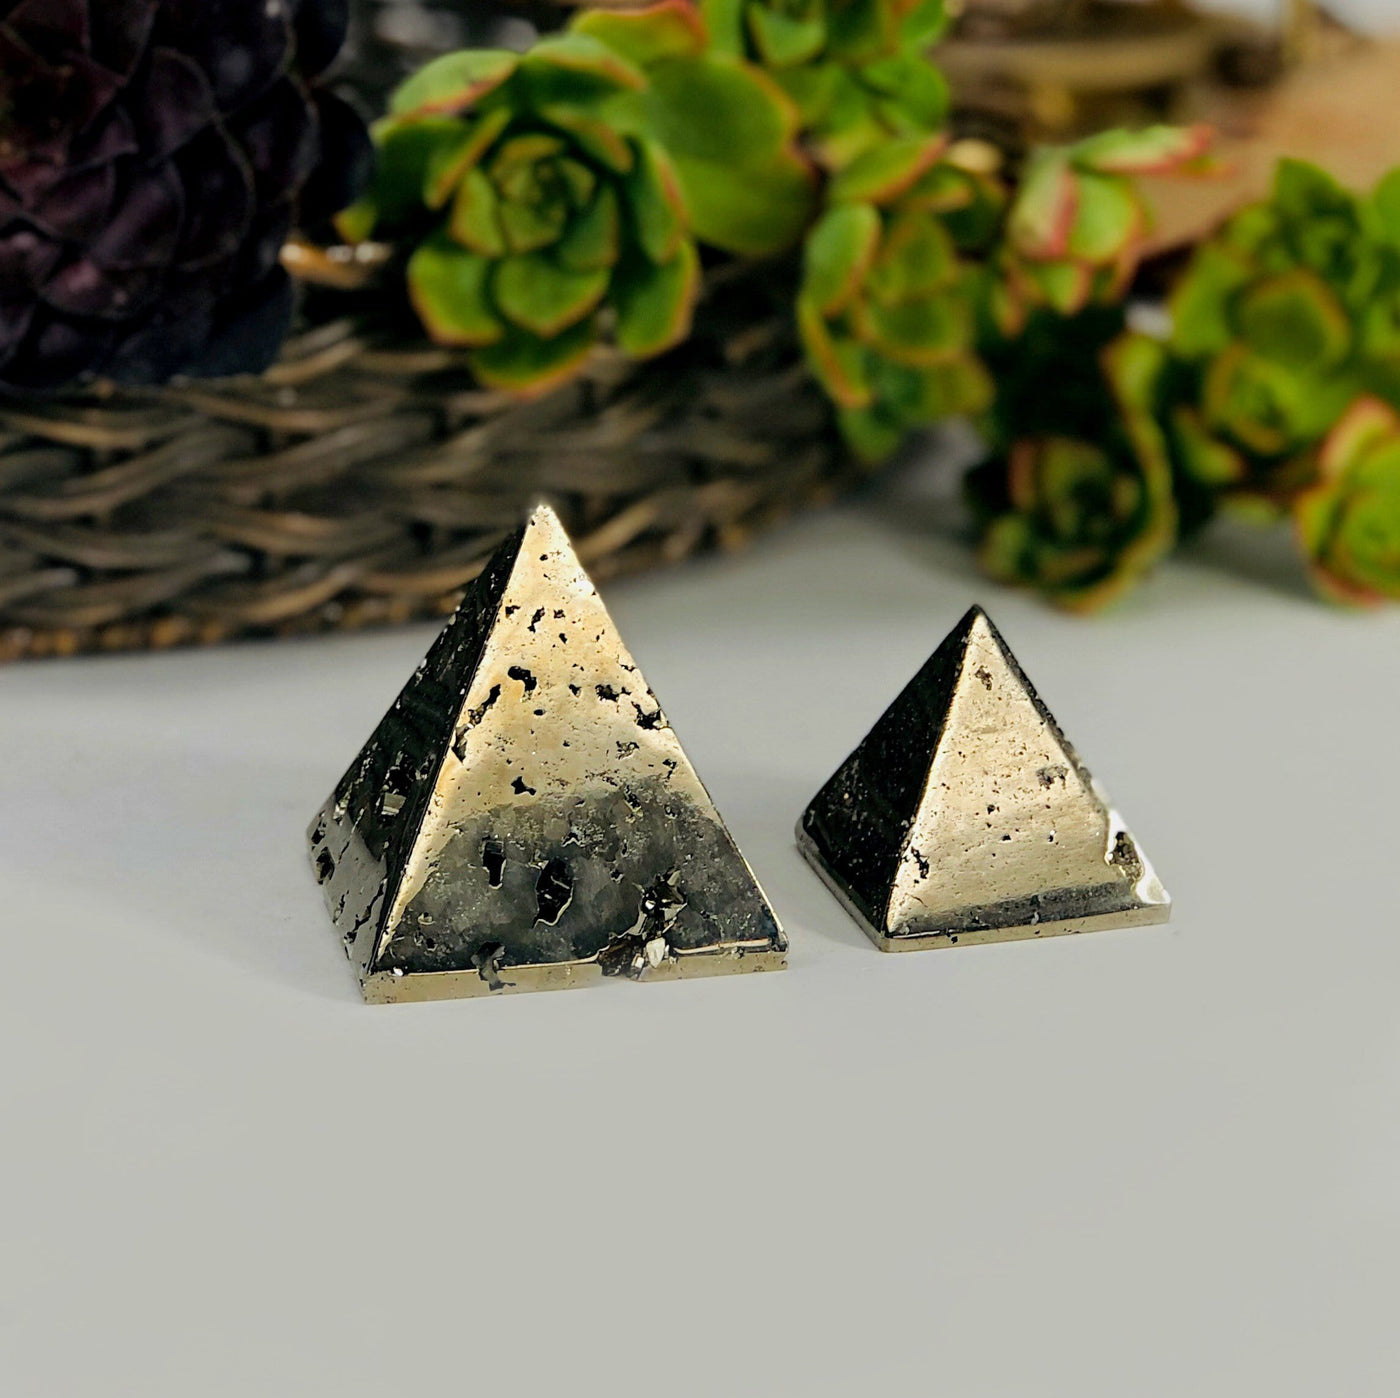 Pyrite Pyramid Stones - By Weight